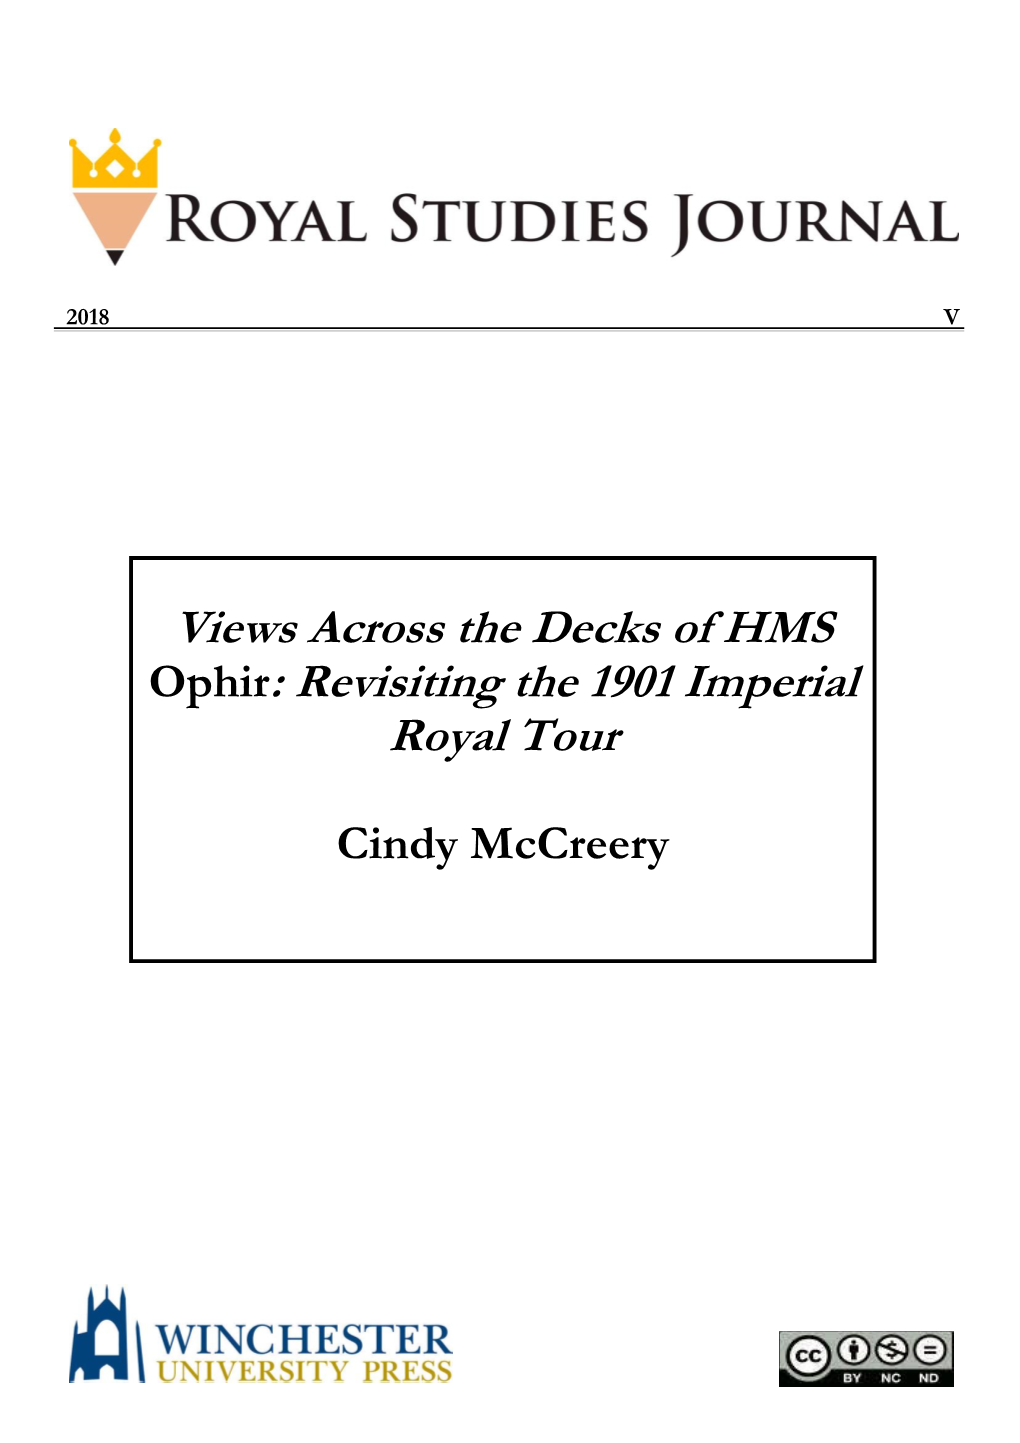 Views Across the Decks of HMS Ophir: Revisiting the 1901 Imperial Royal Tour